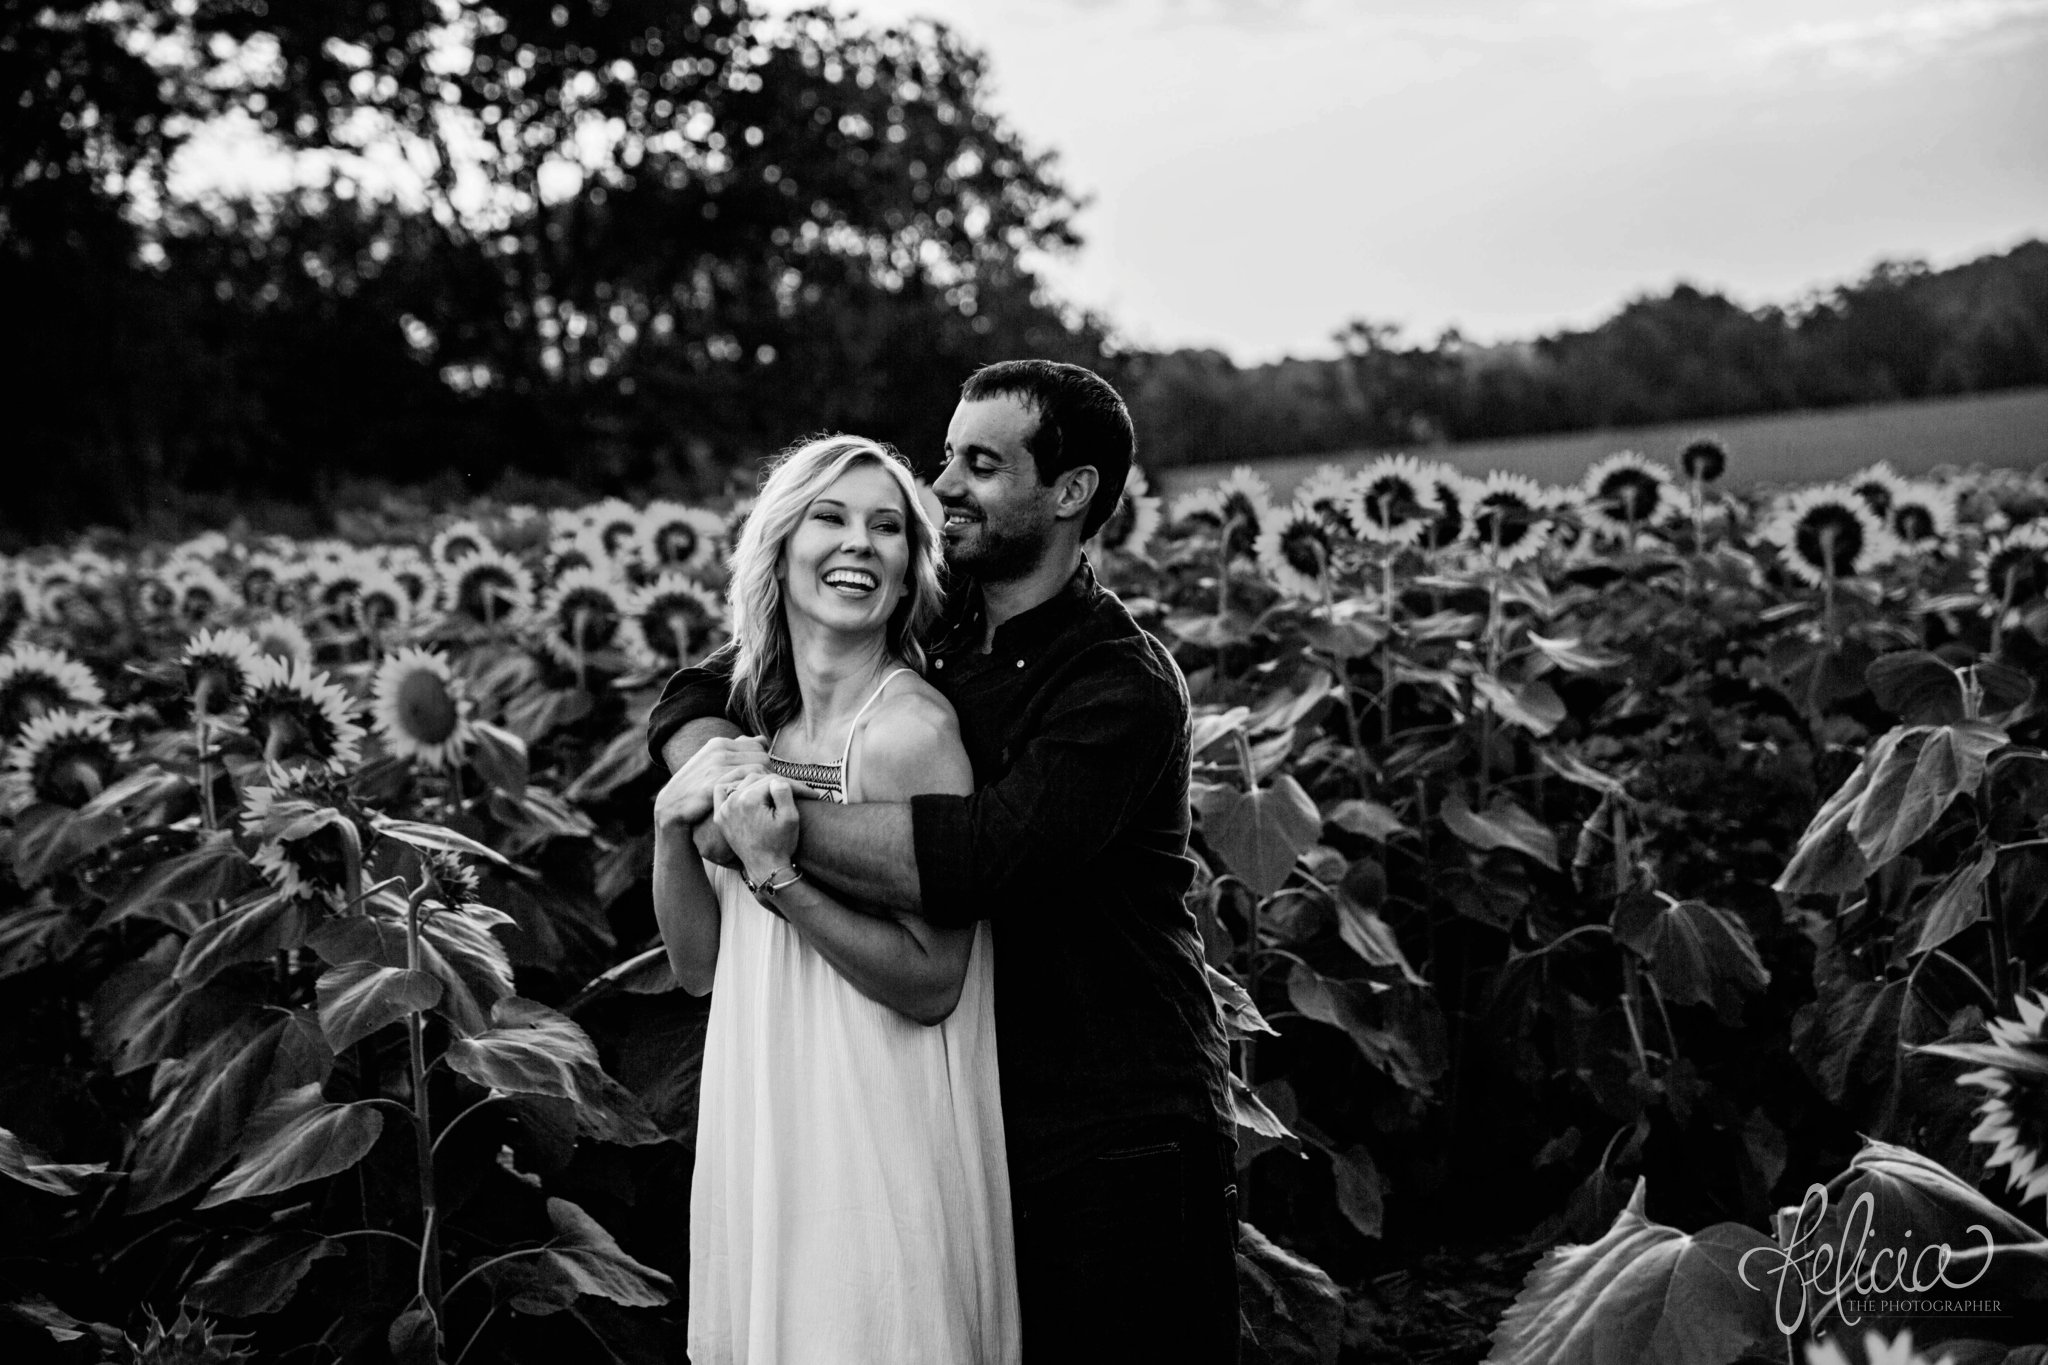 Sunrise Engagement Photos | Felicia The Photographer | Sunflower field | black and white | Laughing